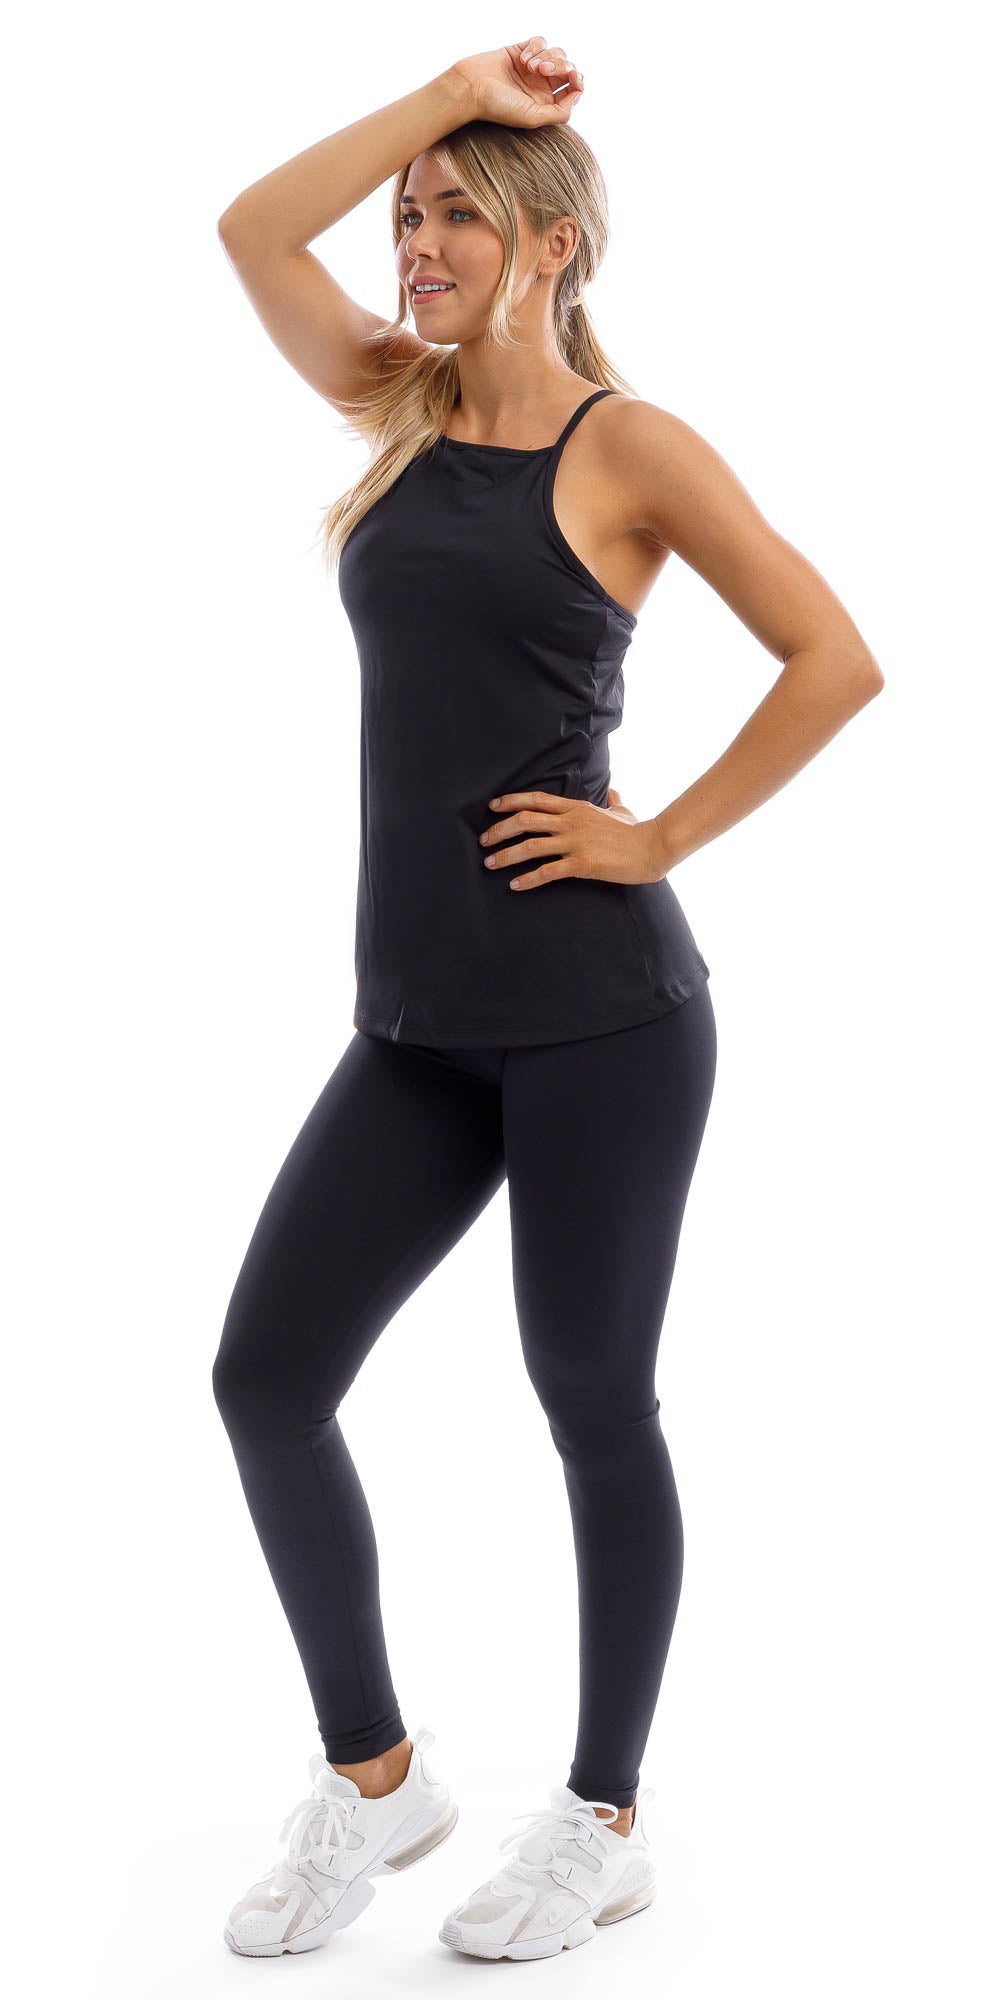 Full body angled side view of girl in black Midnight Performance Tank and matching leggings putting one leg forward, one hand on her head and the other hand on waist